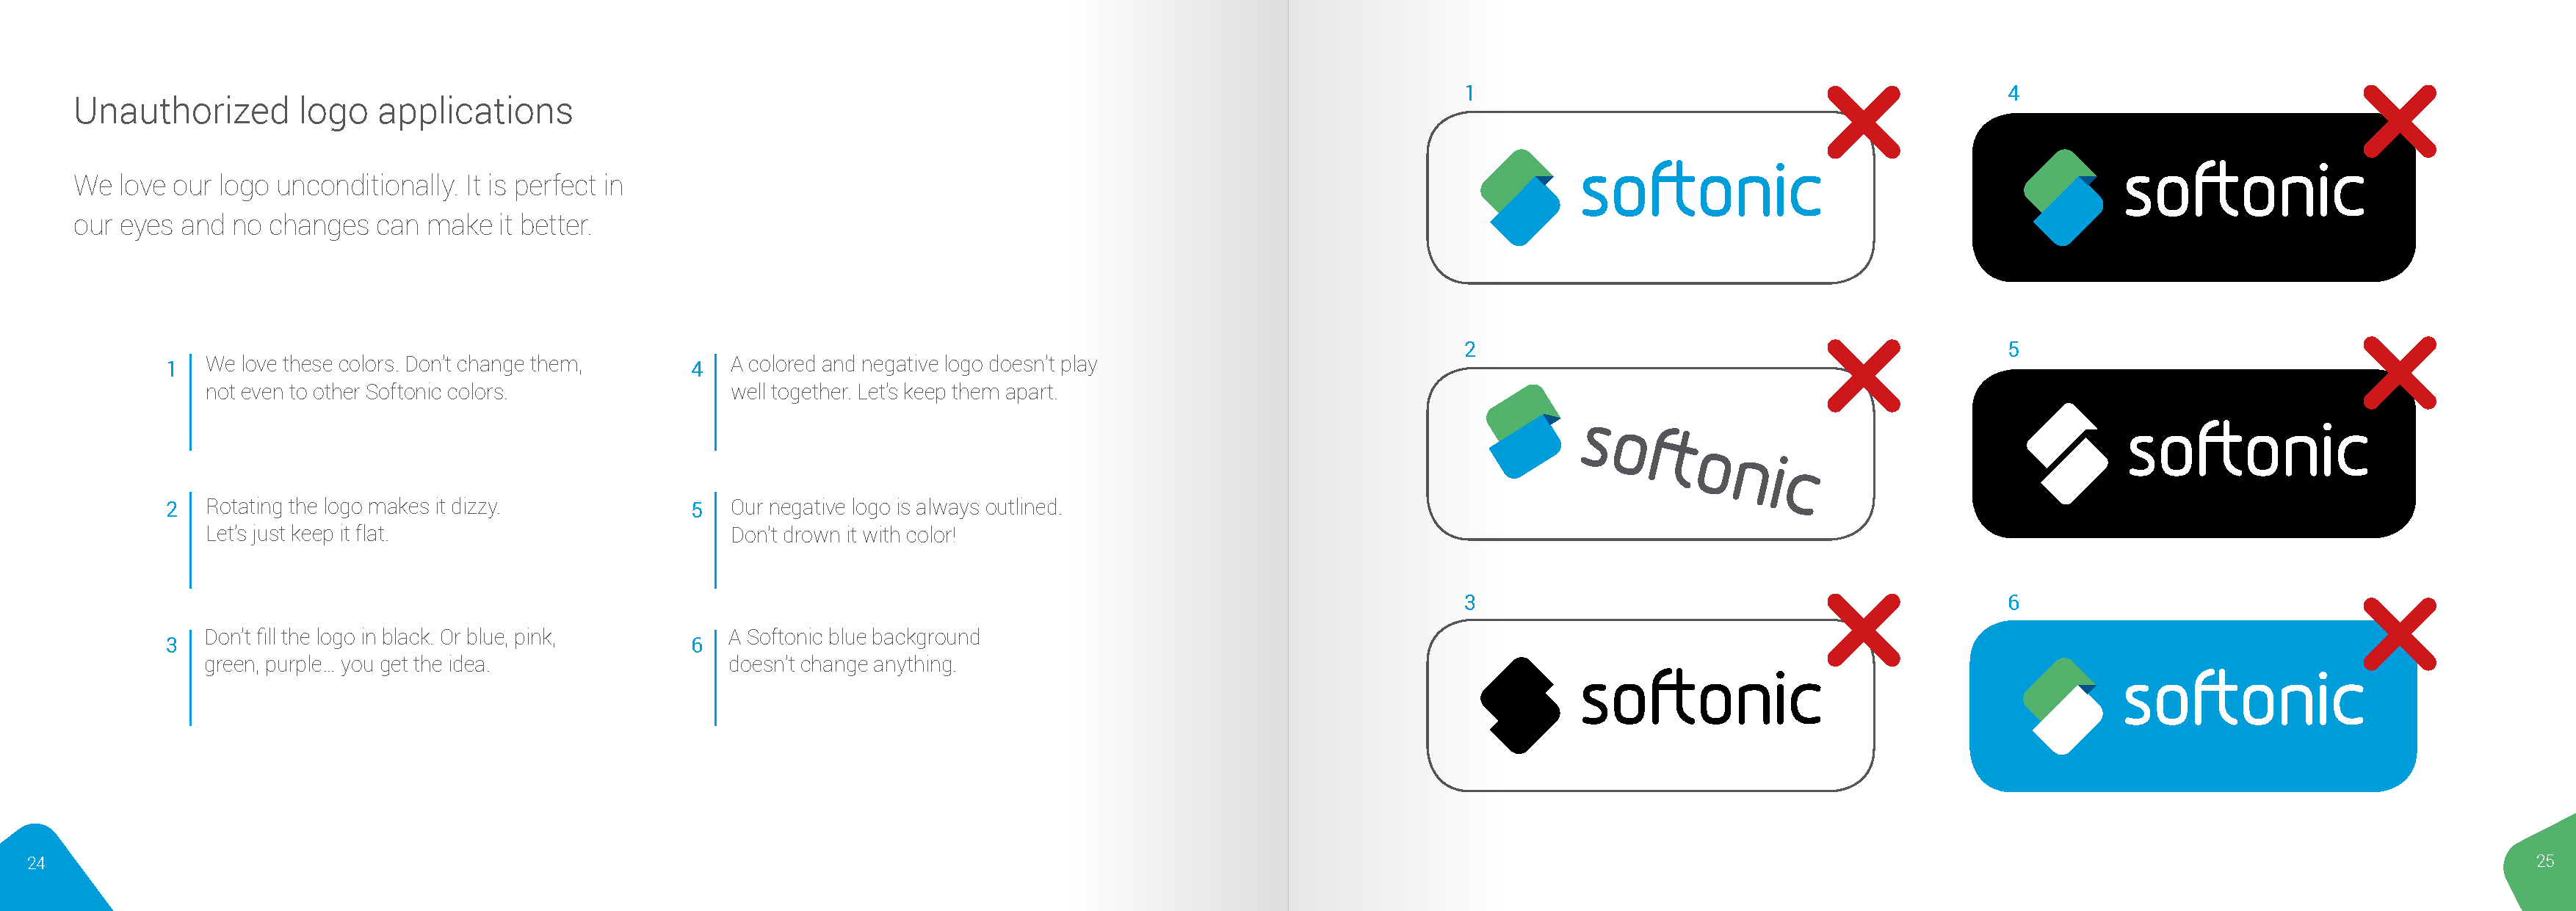 Softonic-Brand-Guidelines_Page_13